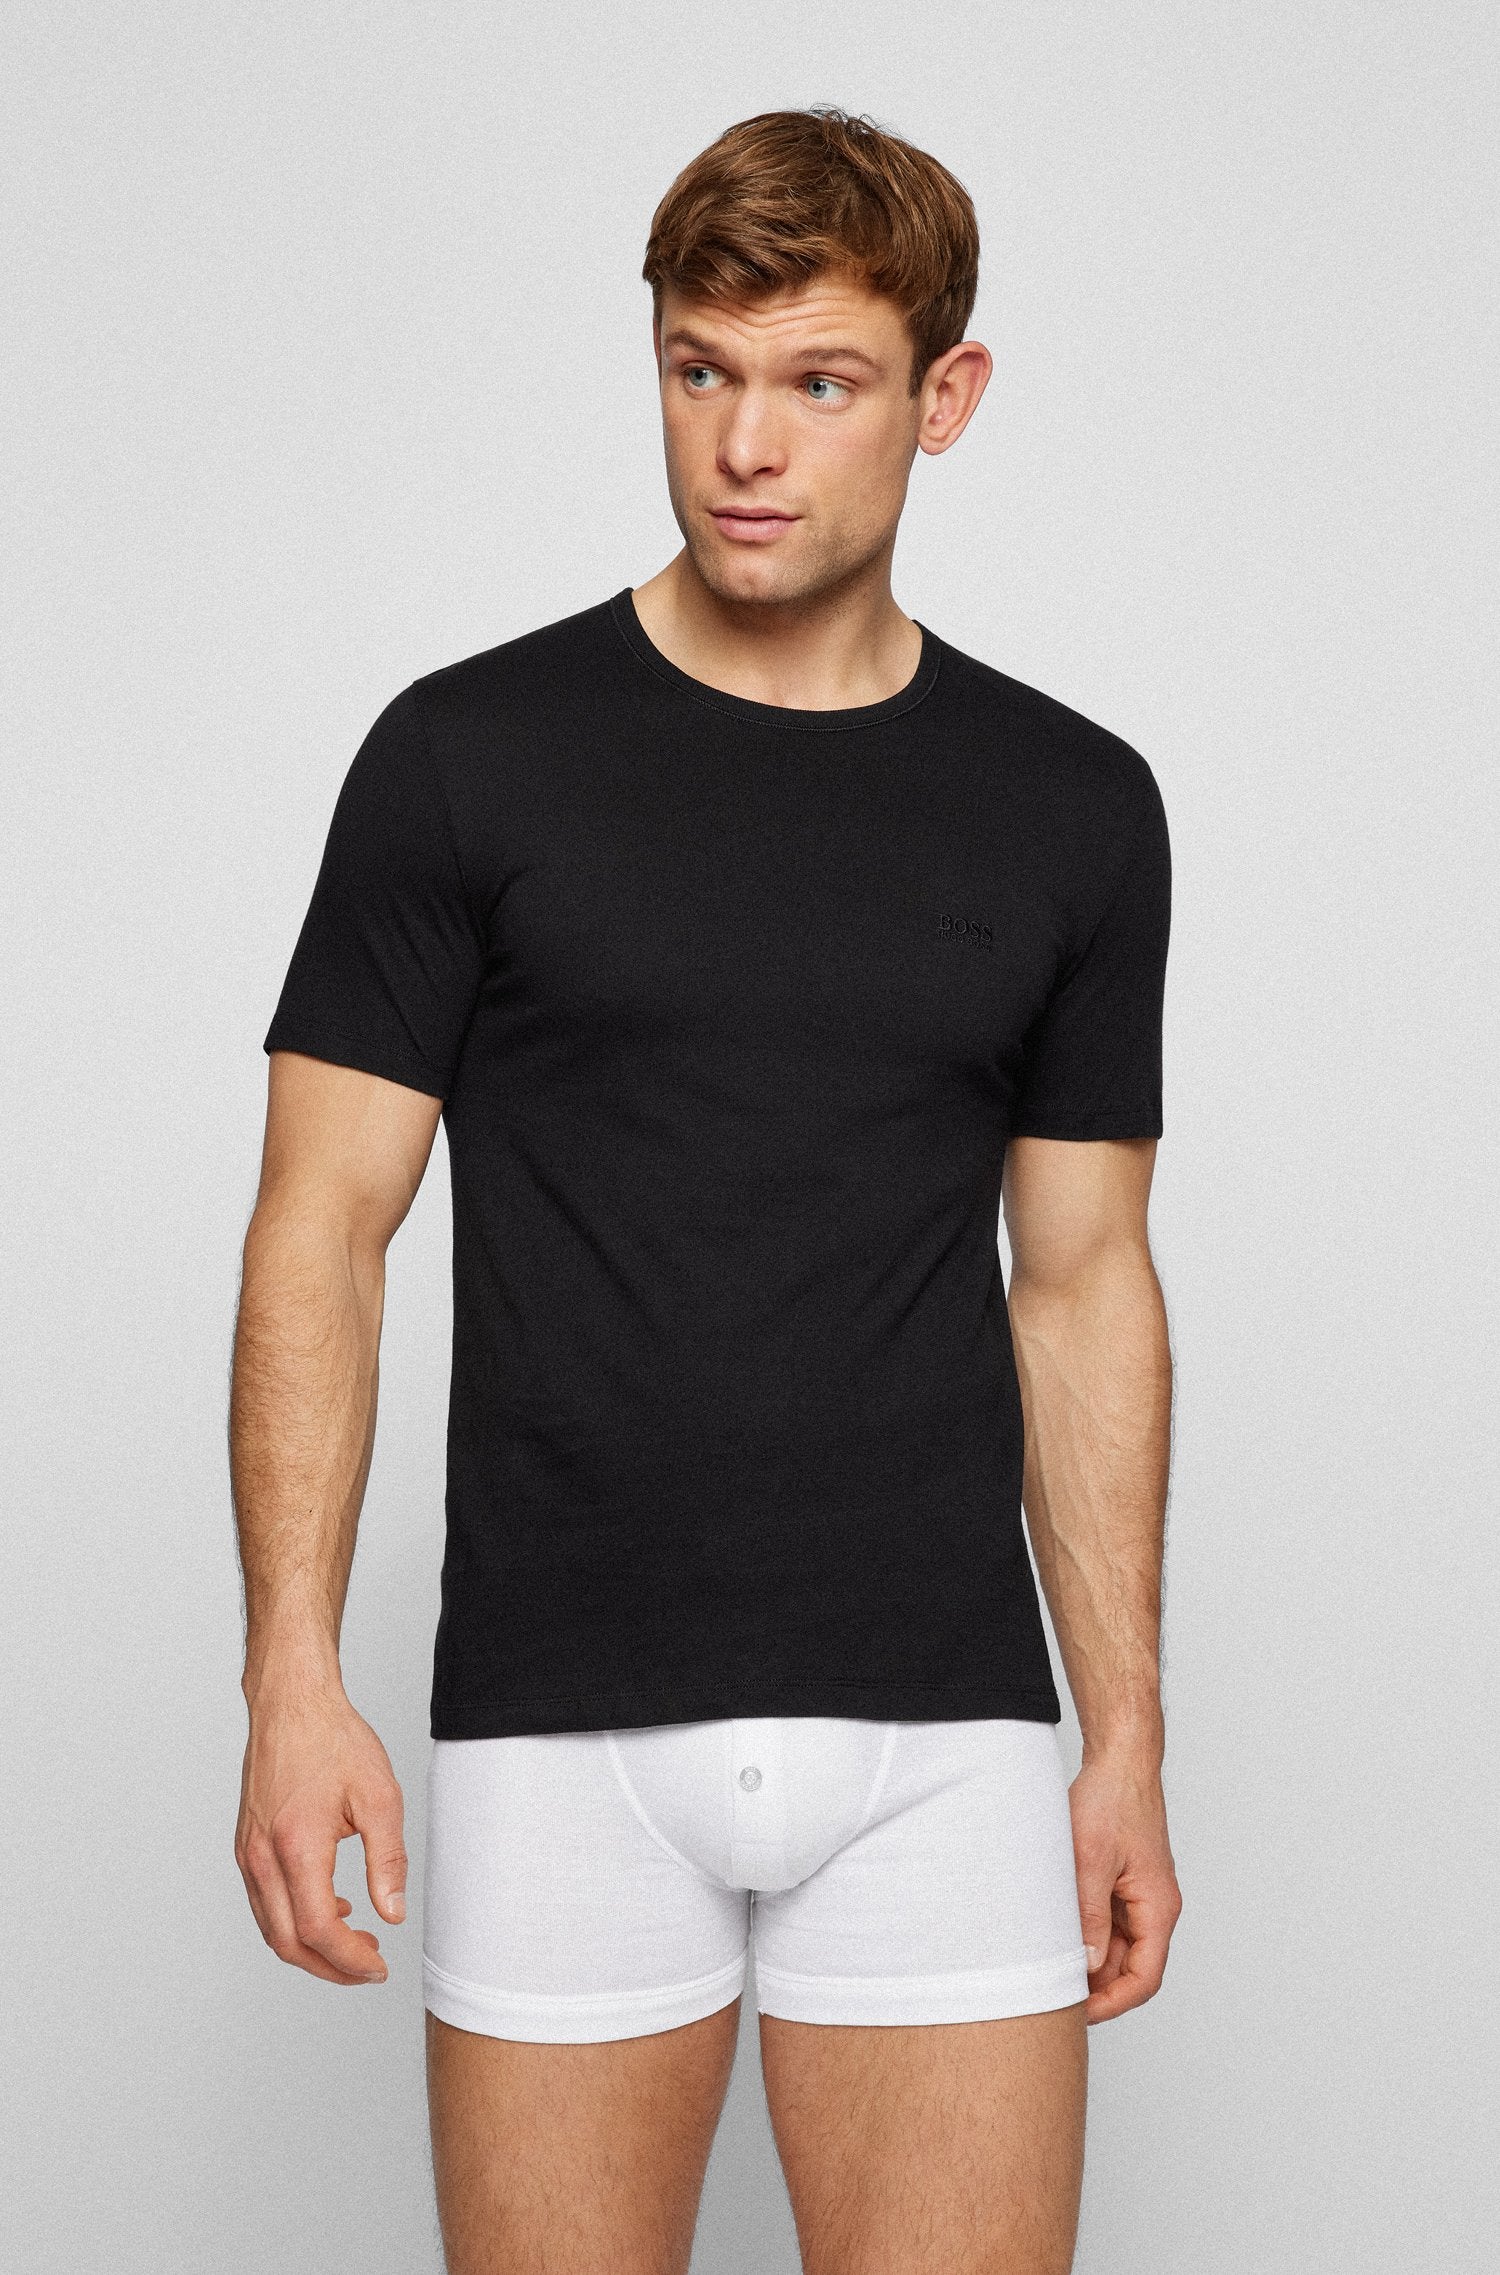 BOSS - 3-Pack Of Underwear T-Shirts In White, Grey and Black Cotton 50325388 999